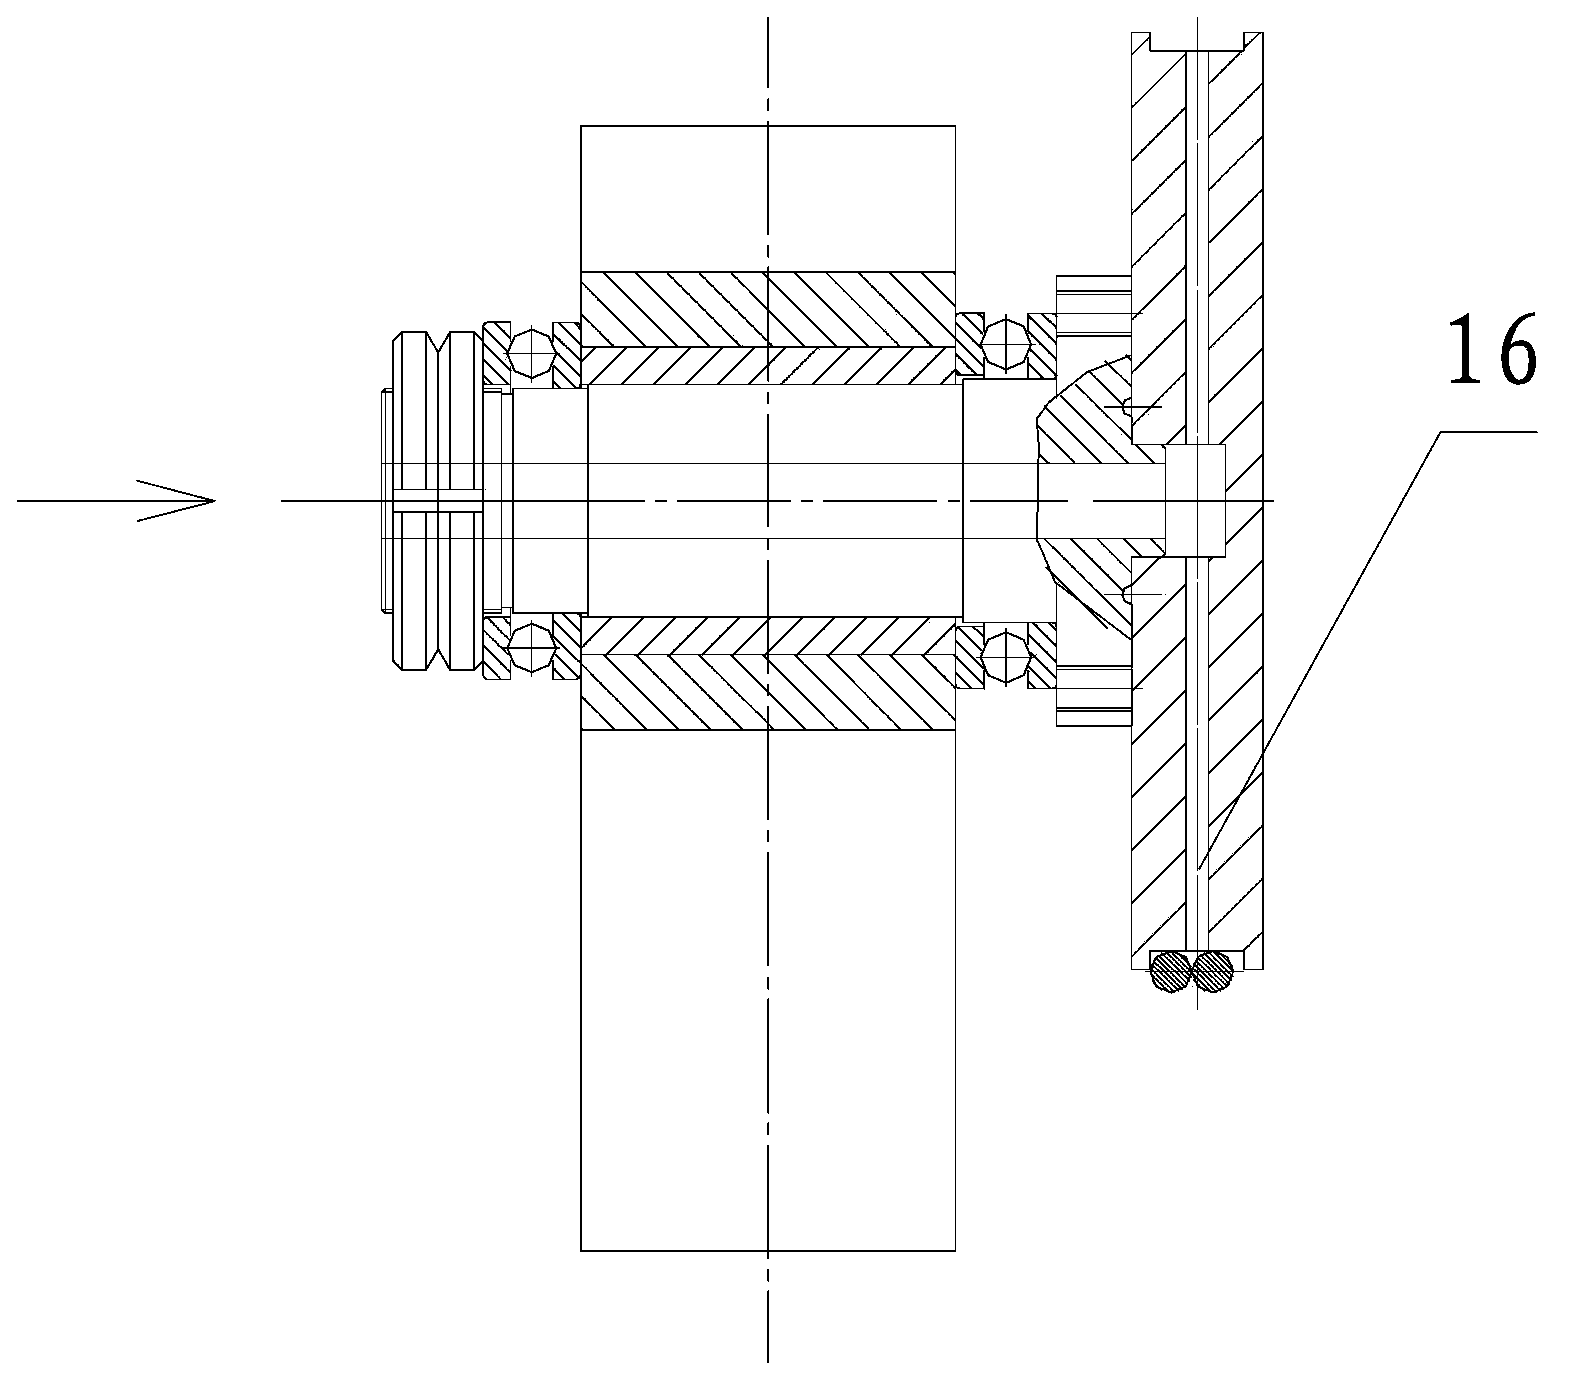 Cooling water circulation structure of seam welder